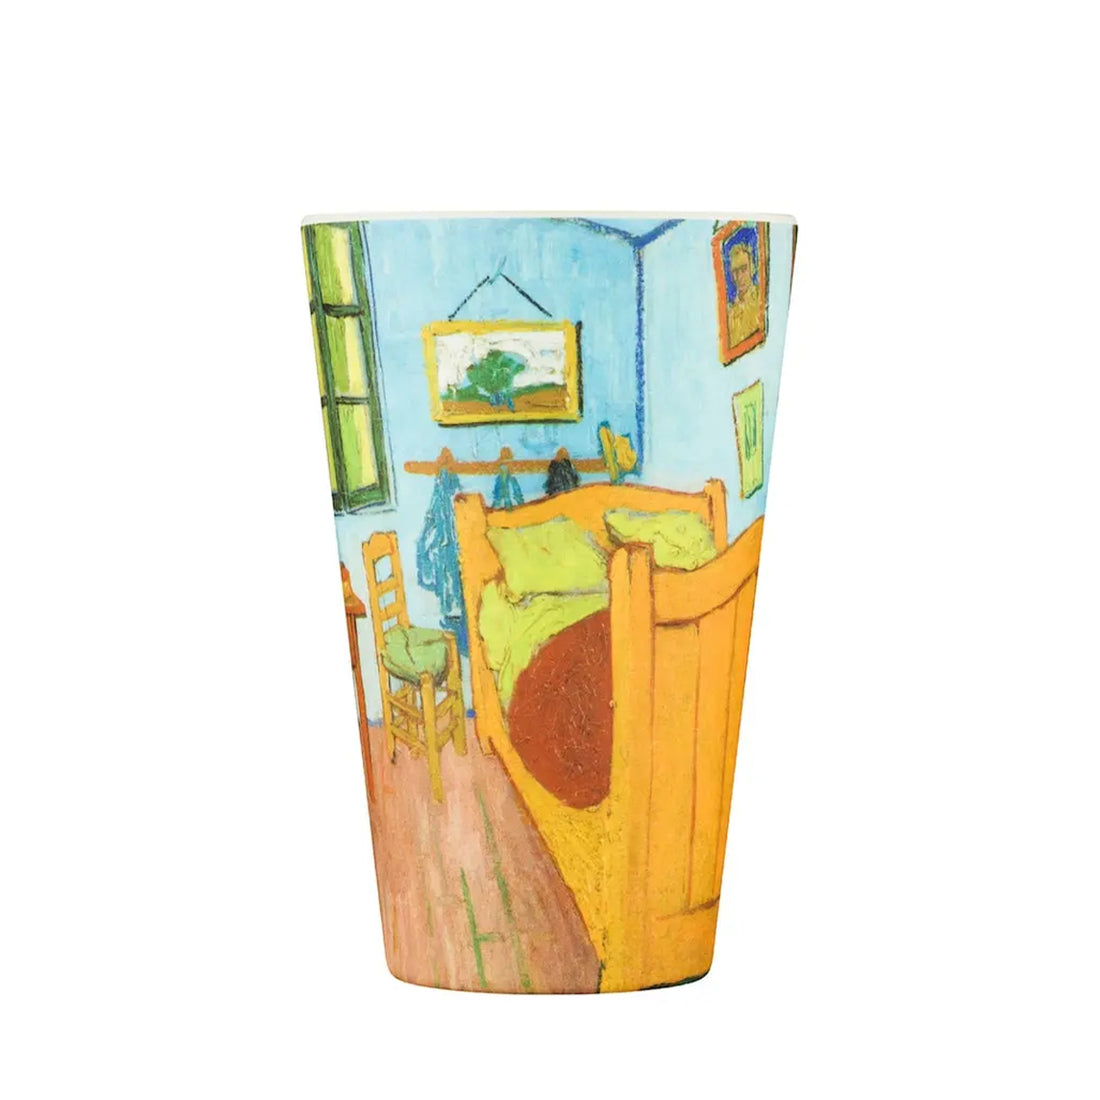 Ecoffee, Ecoffee Cup Reusable Bamboo Travel Cup 0.4L / 14 oz. - Van Gogh The Bedroom 1888, Redber Coffee